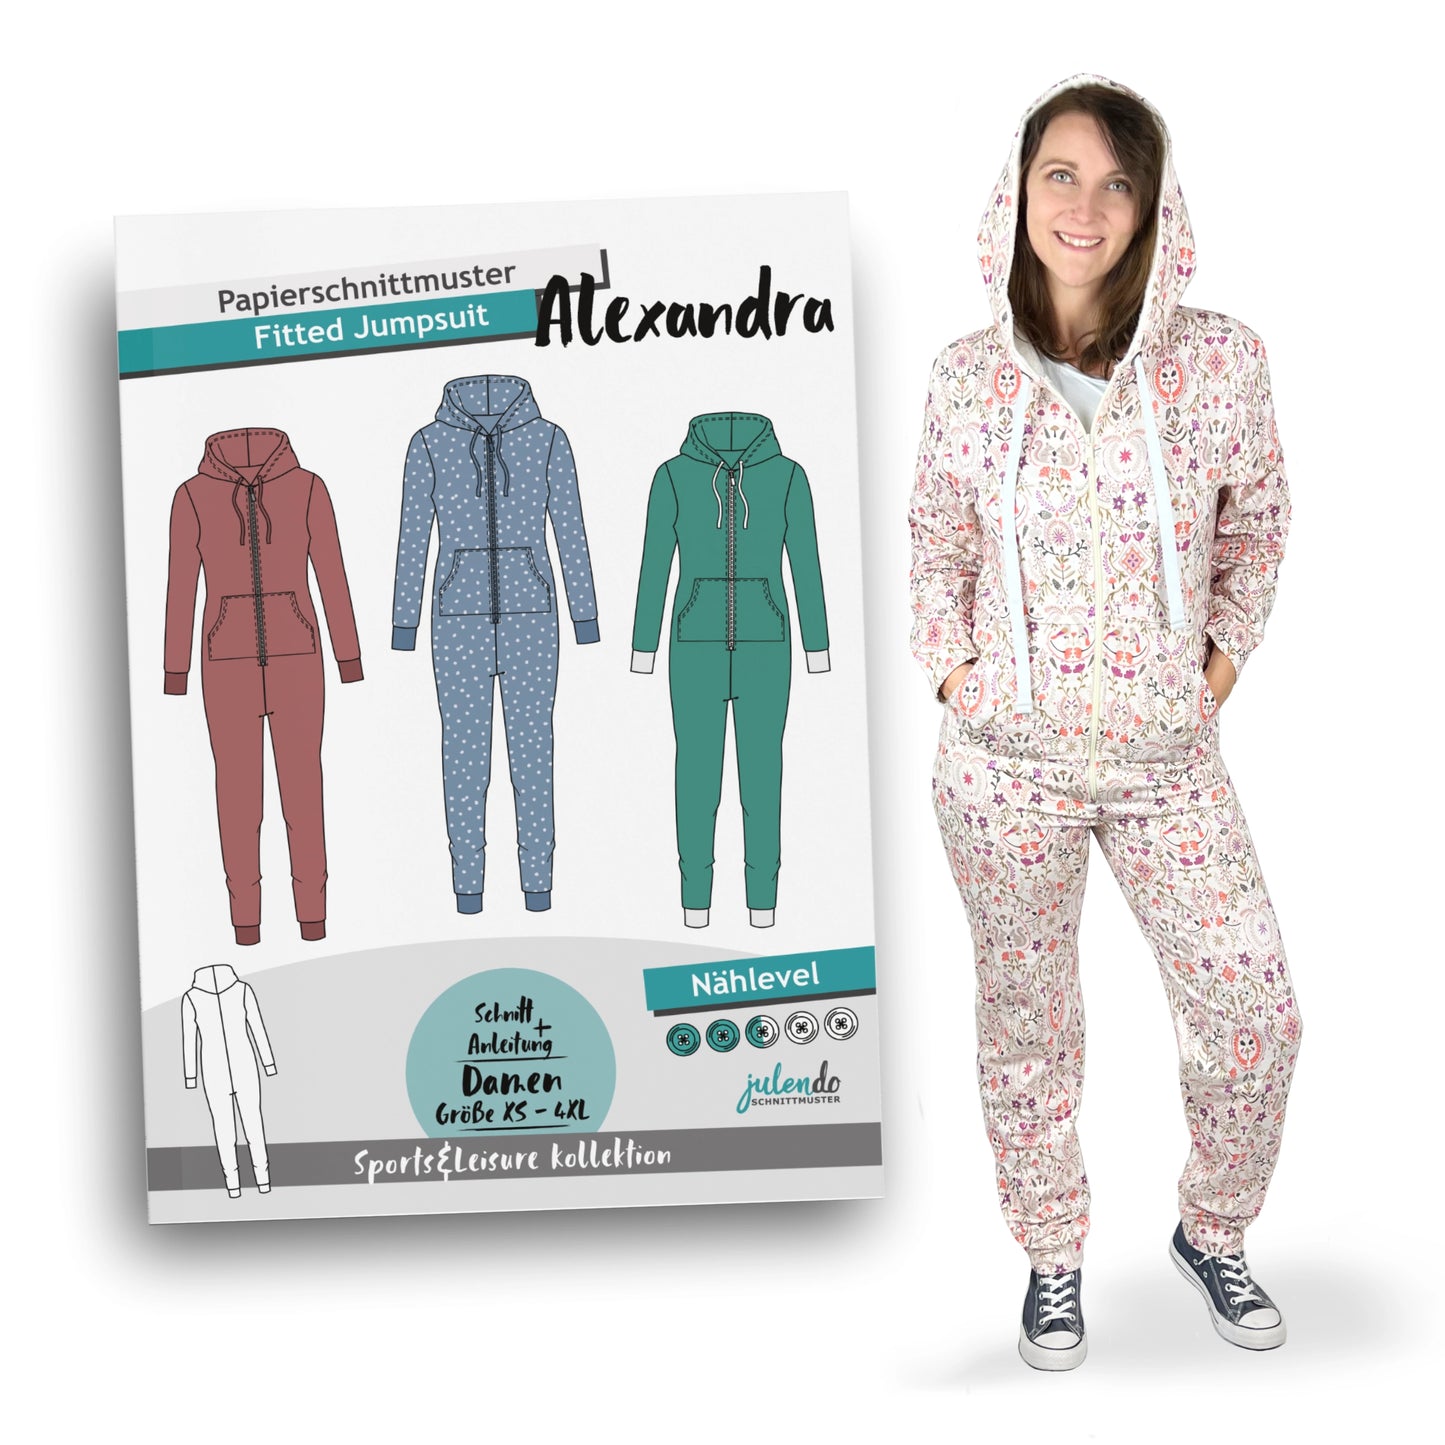 Schnittmuster Fitted Jumpsuit Alexandra